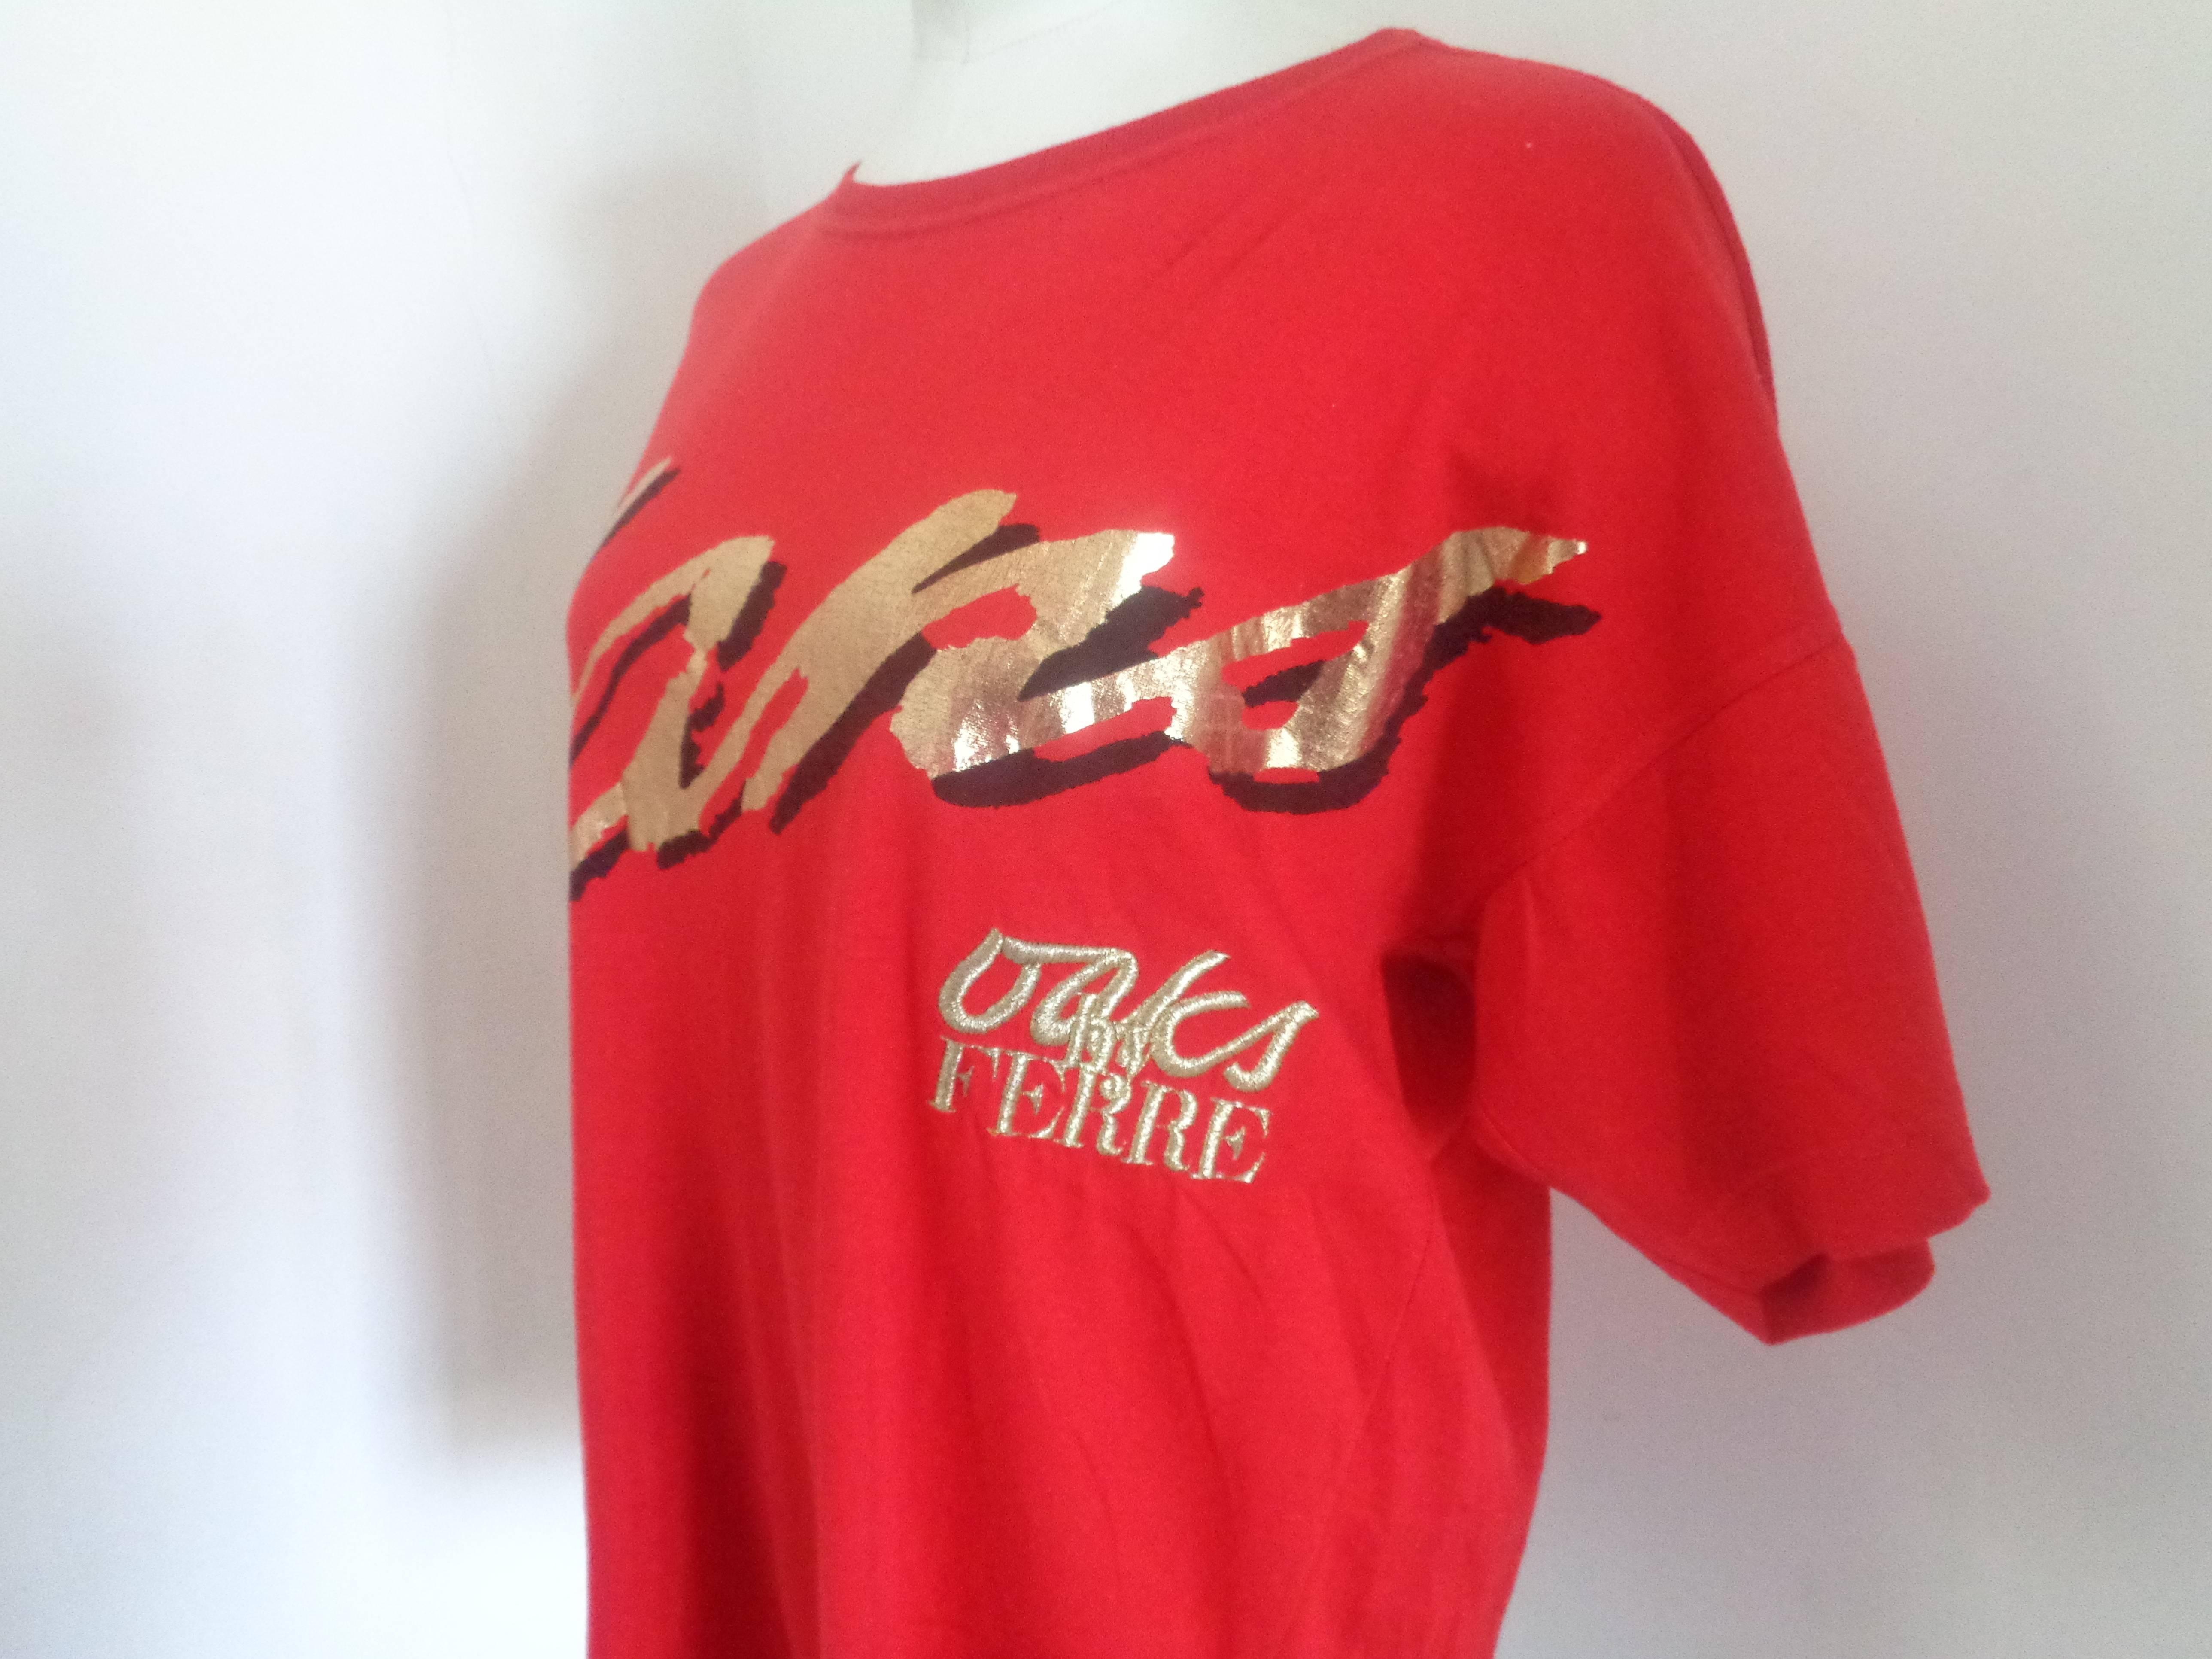 Gianfranco Ferre Oaks Red Cotton Shirt

gold tone print on the front
Totally made in italy in size M 